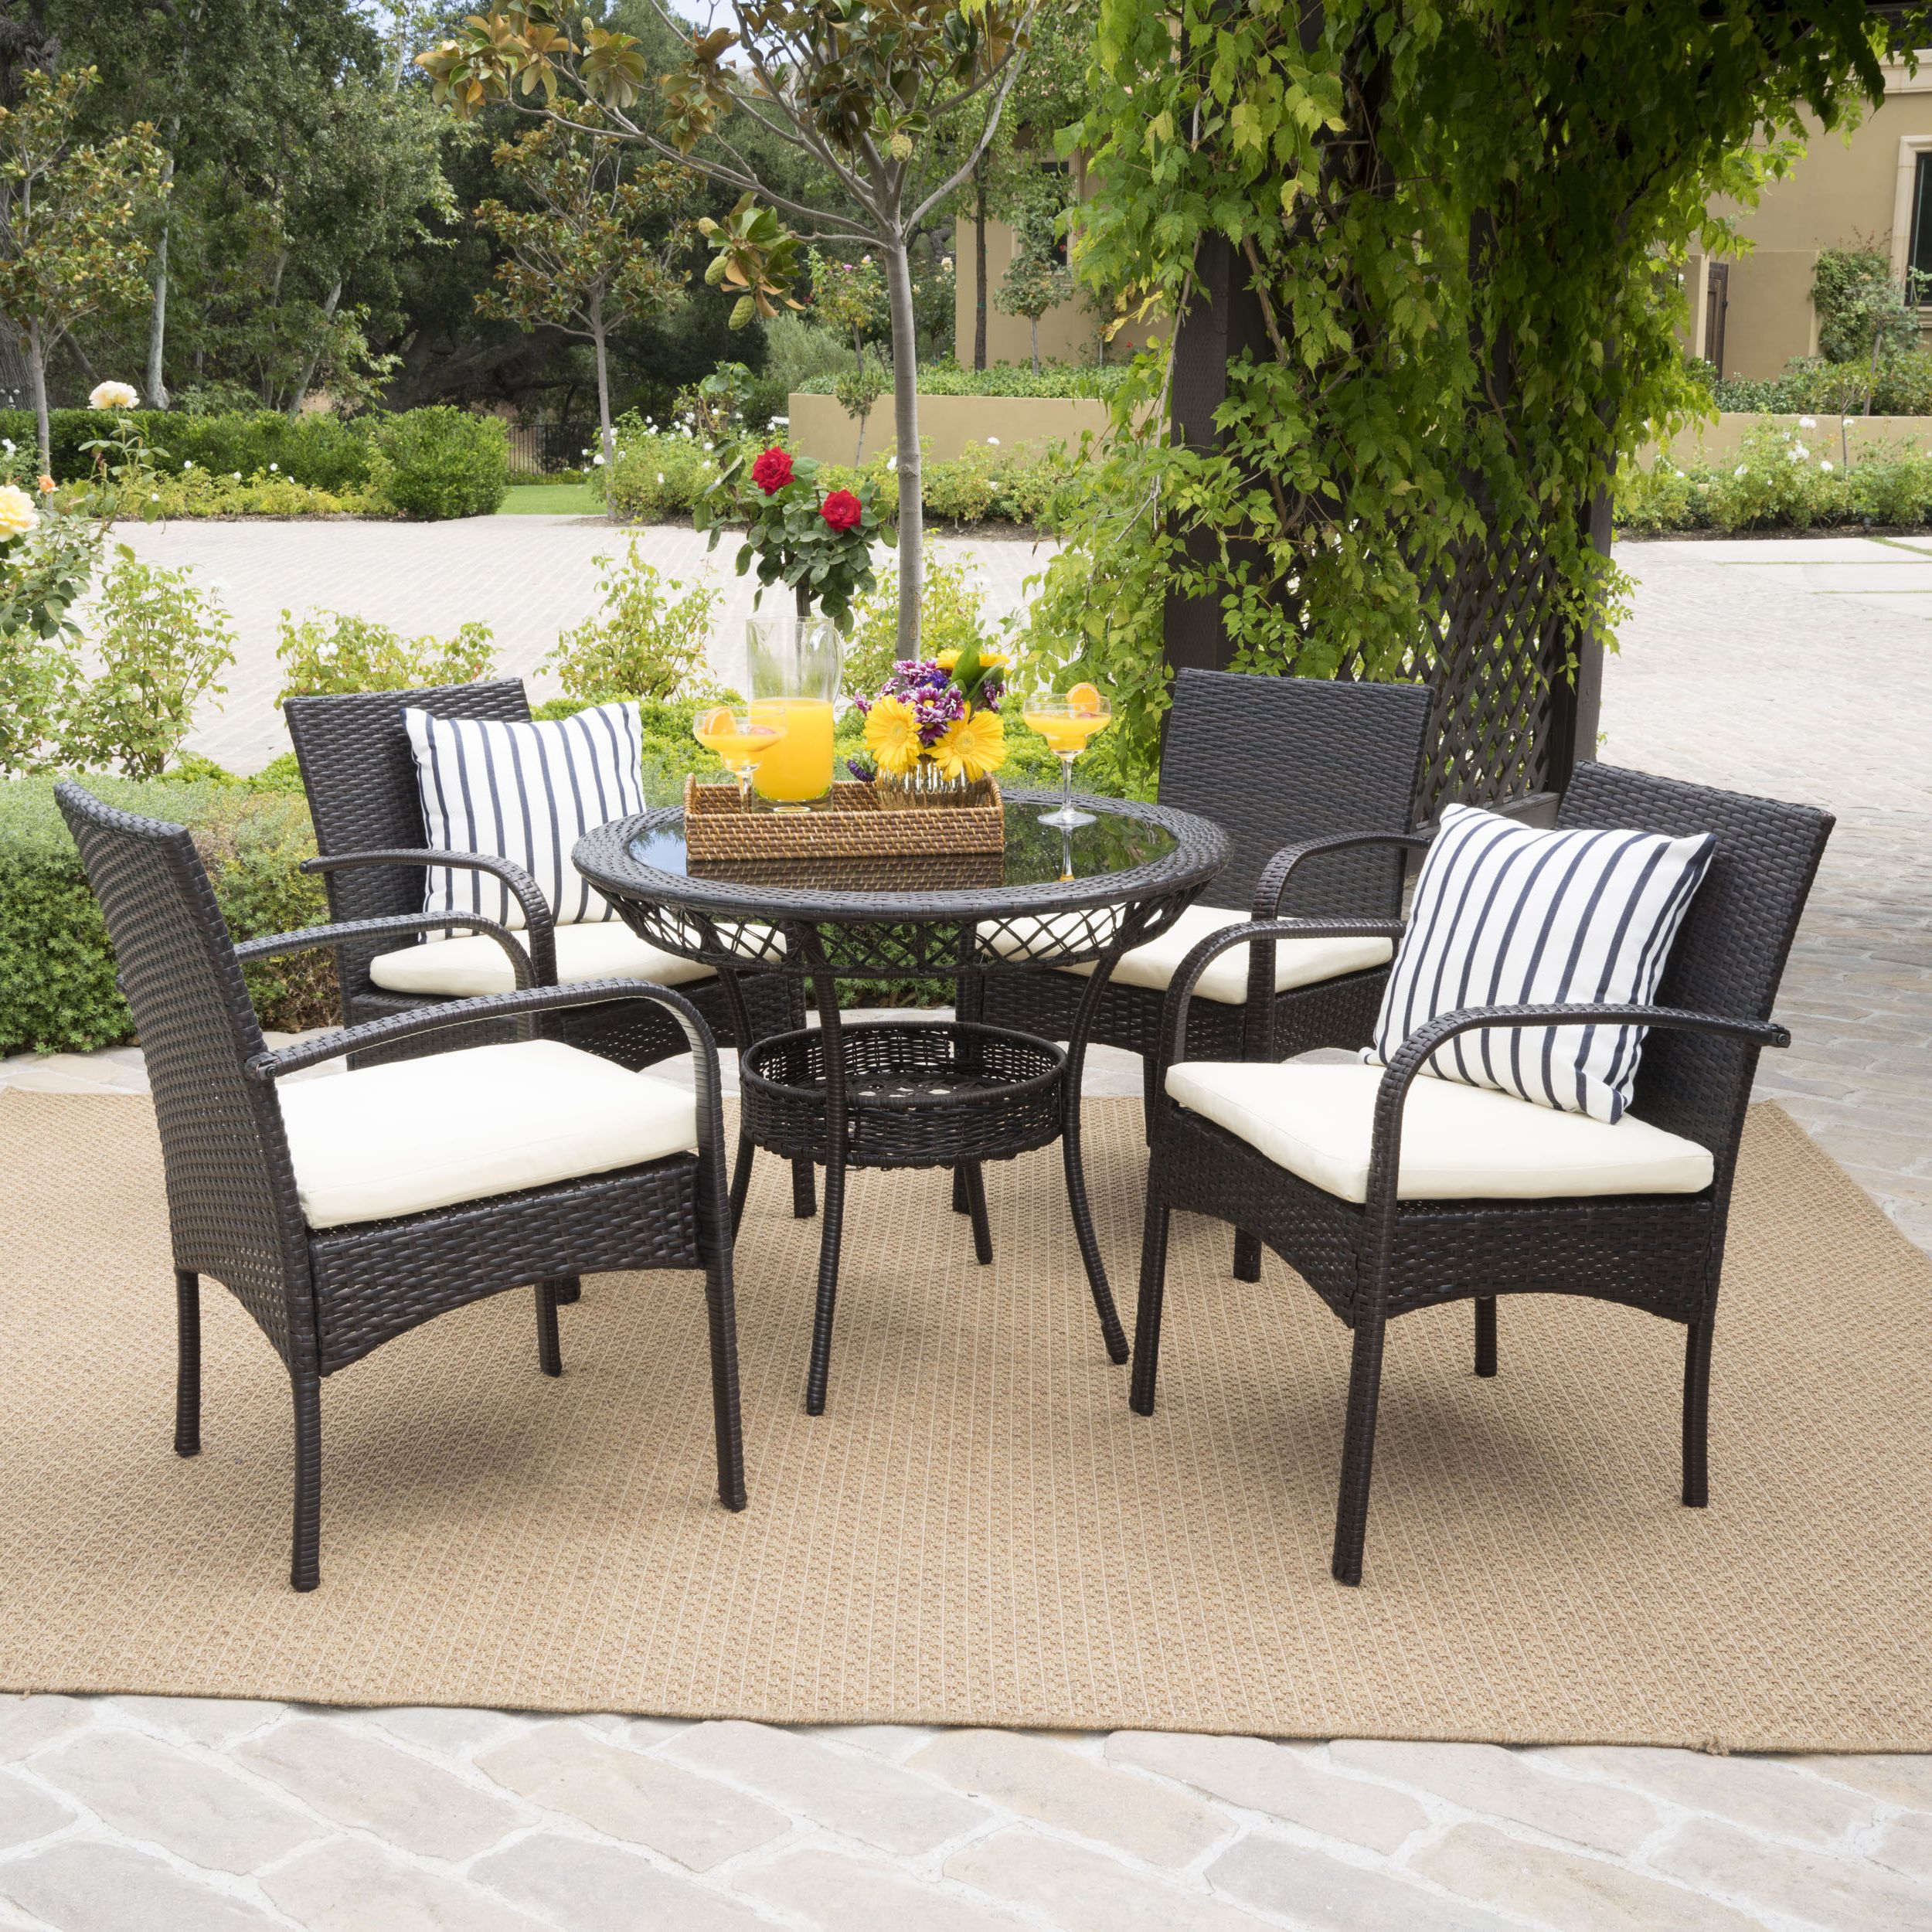 Venetian 5 Piece Outdoor Round Glass Top Wicker Dining Set With Inside Fashionable 5 Piece Patio Dining Set (View 5 of 15)